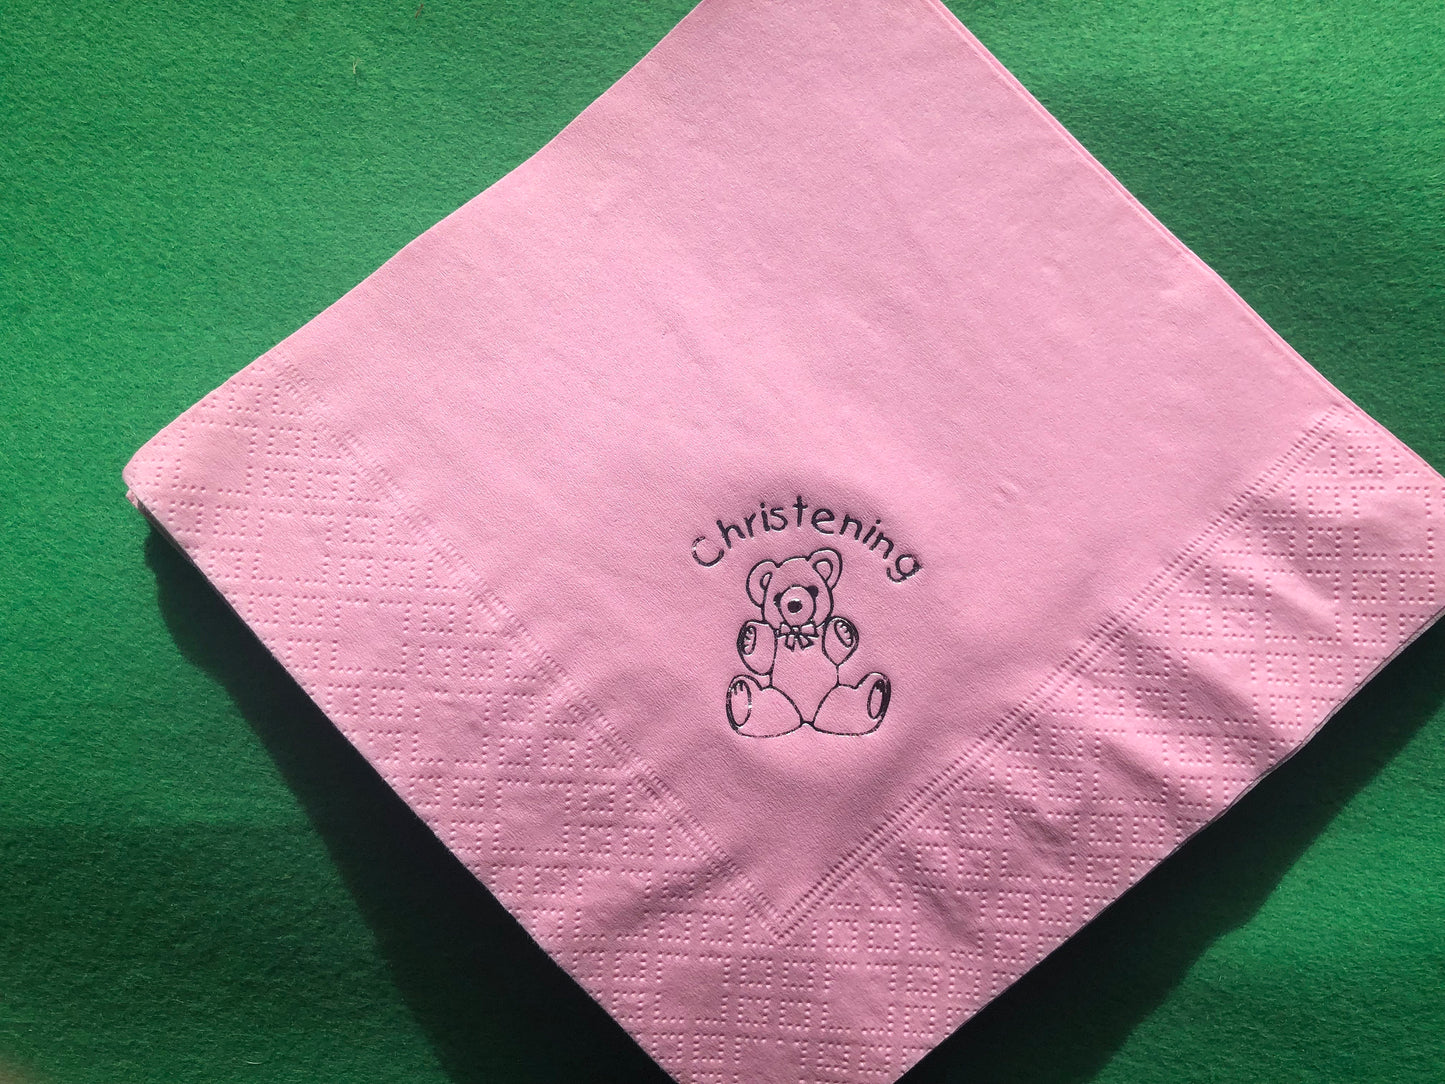 18 x Christening Party Napkins / Serviettes in baby pink or sky blue. Teddy bear design in silver